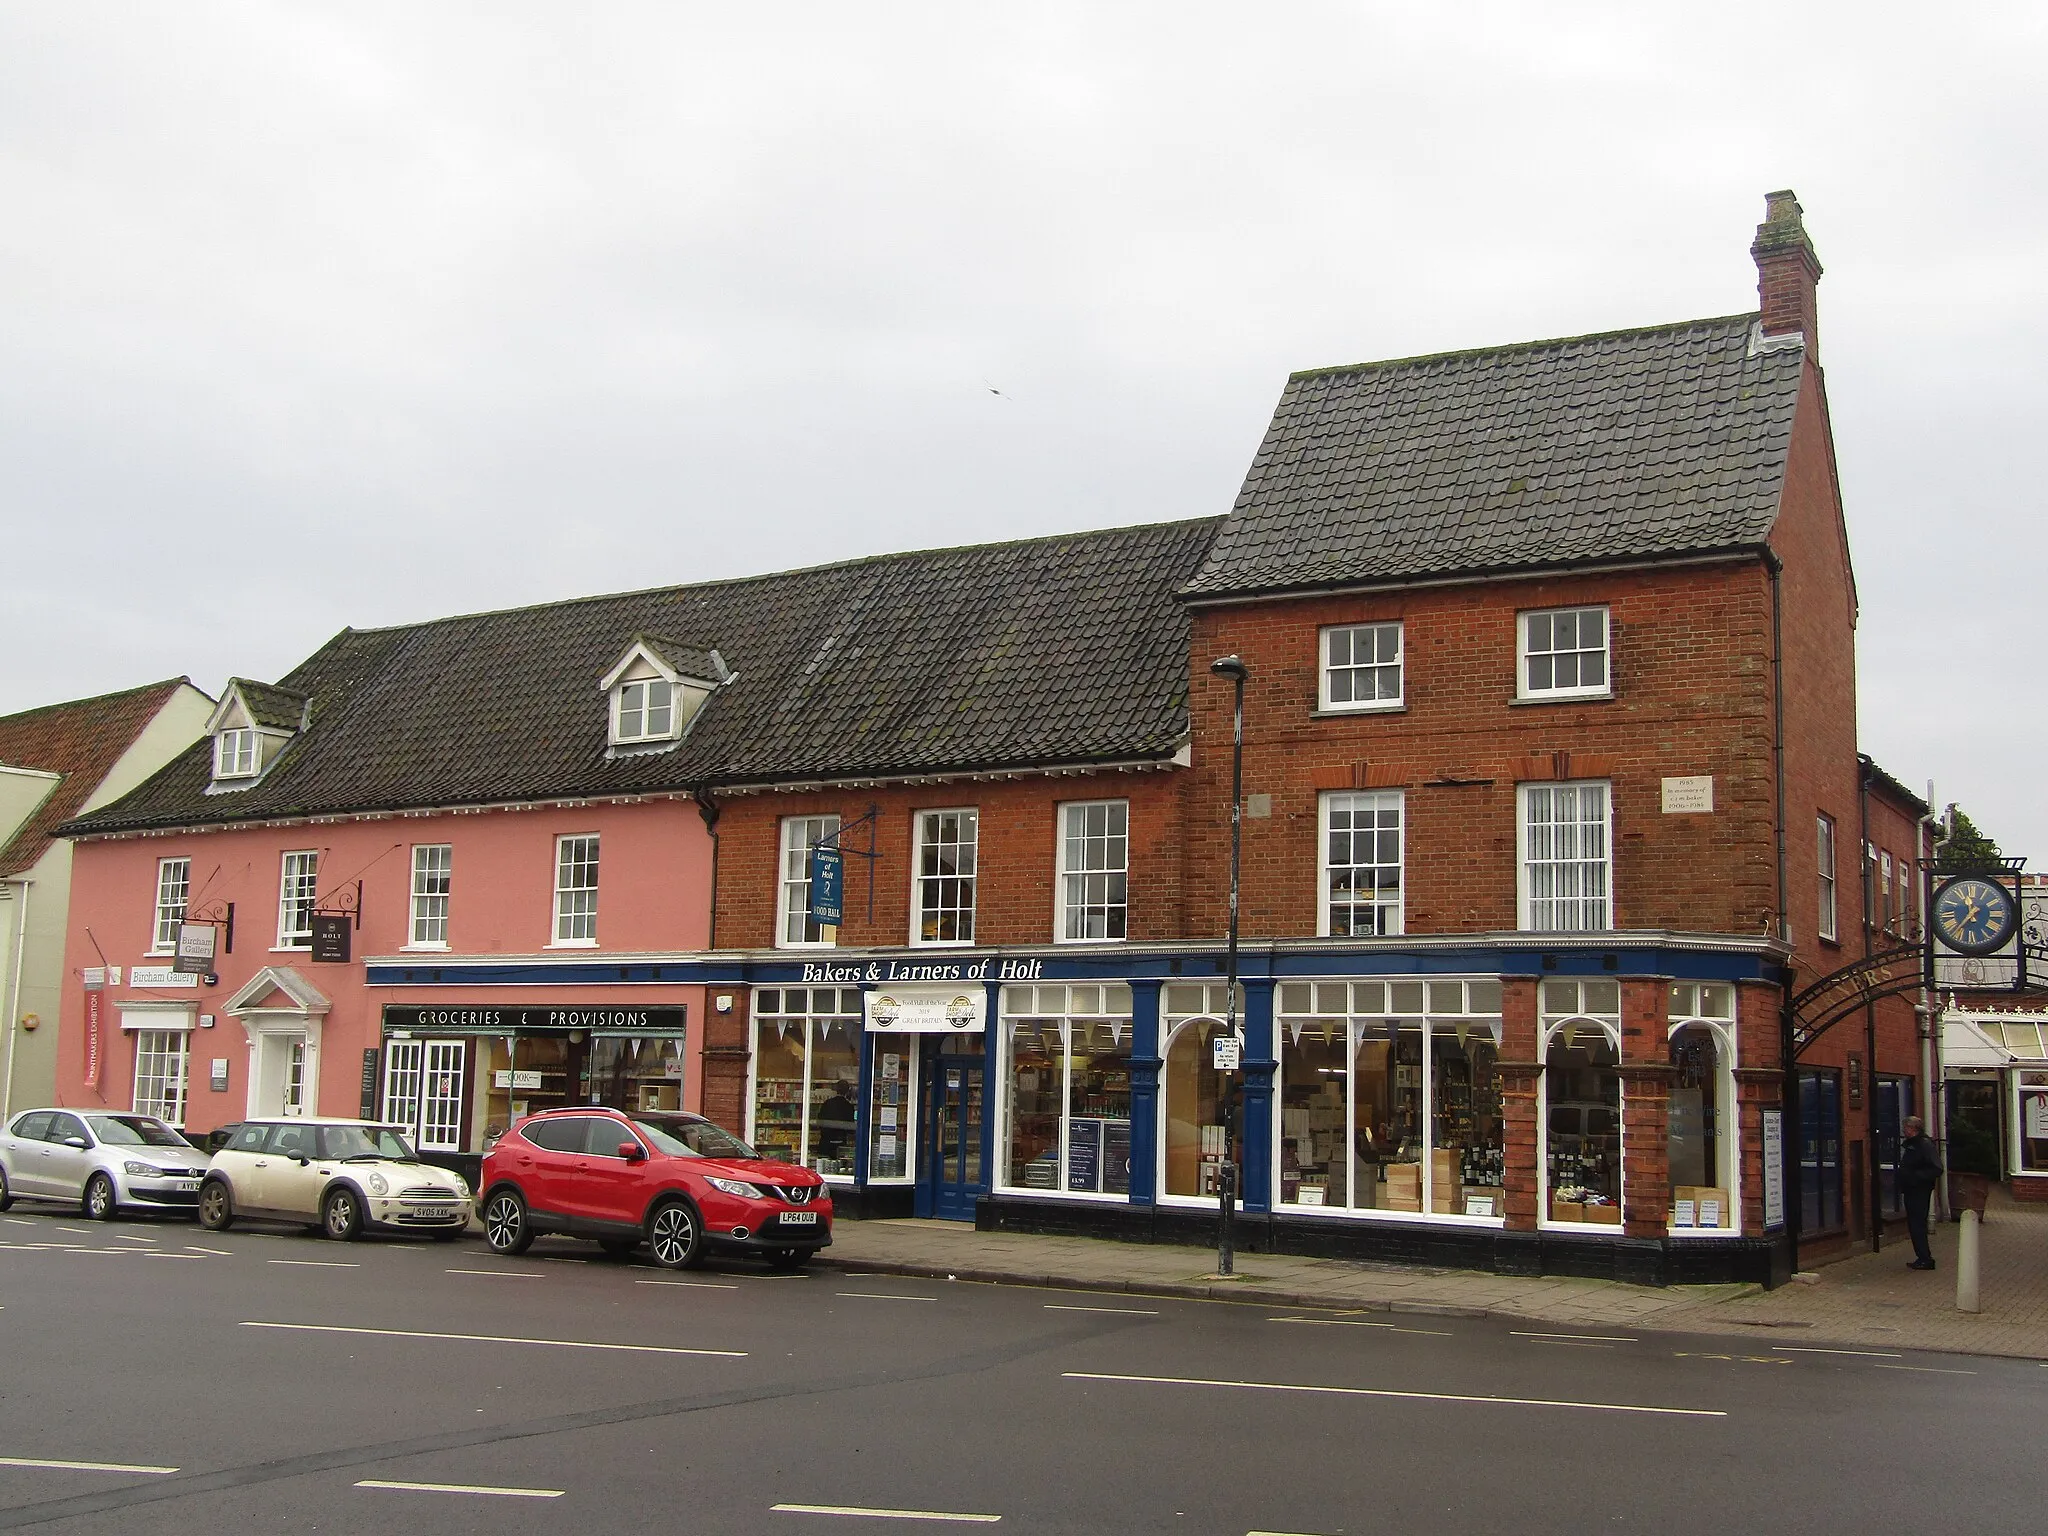 Photo showing: 'Bakers & Larners' is a shop located on Market Place in the town of Holt, Norfolk, England.